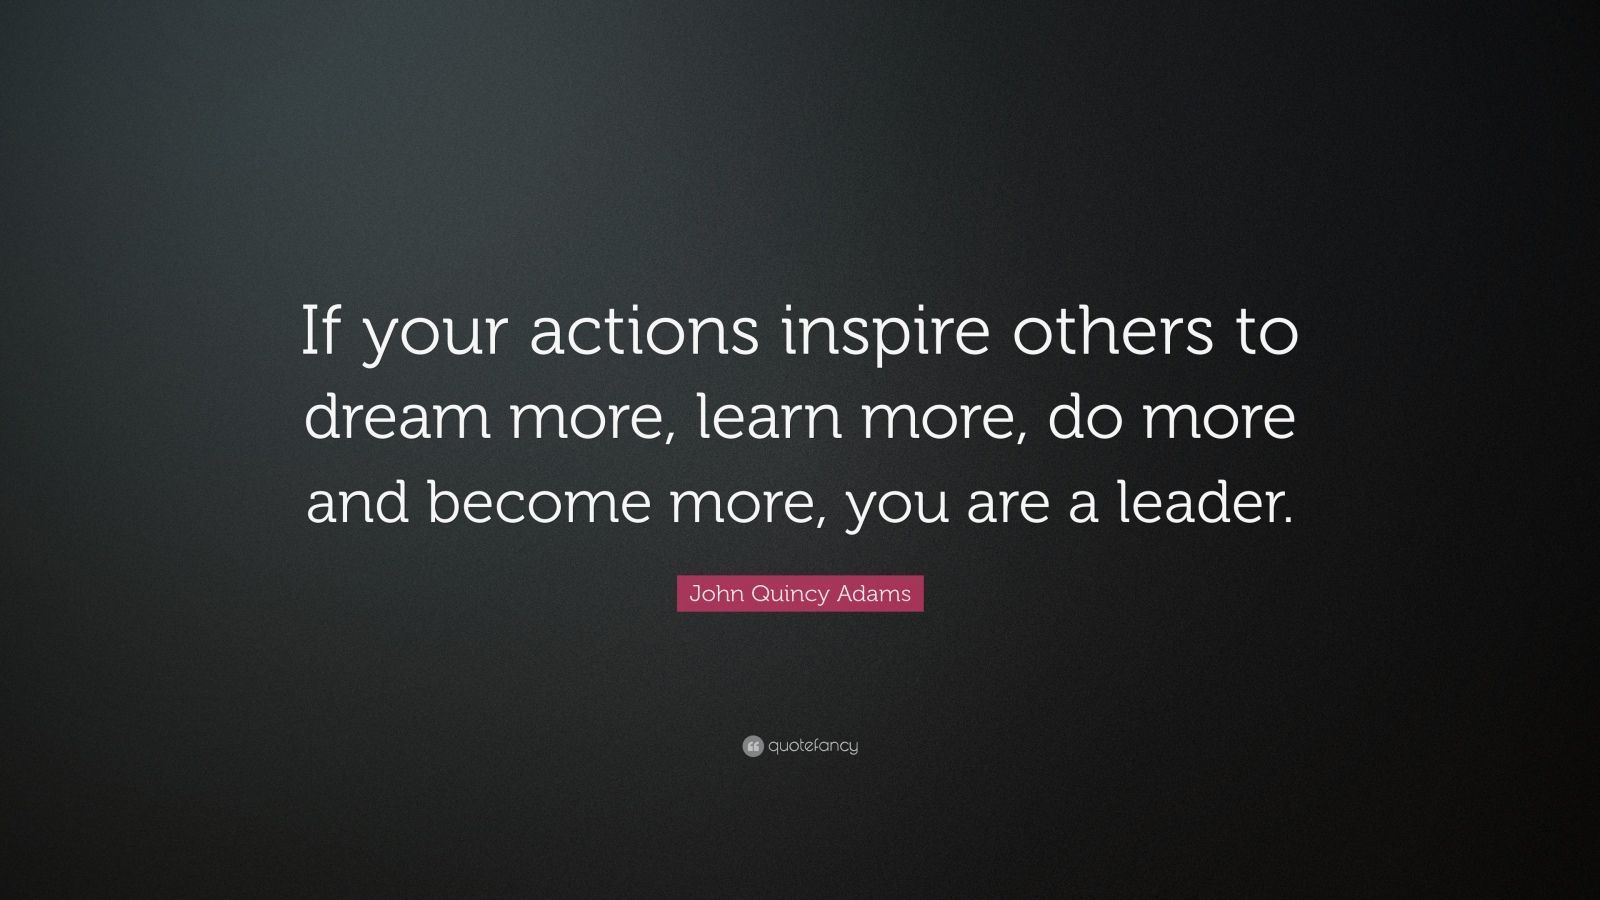 John Quincy Adams Quote “If your actions inspire others